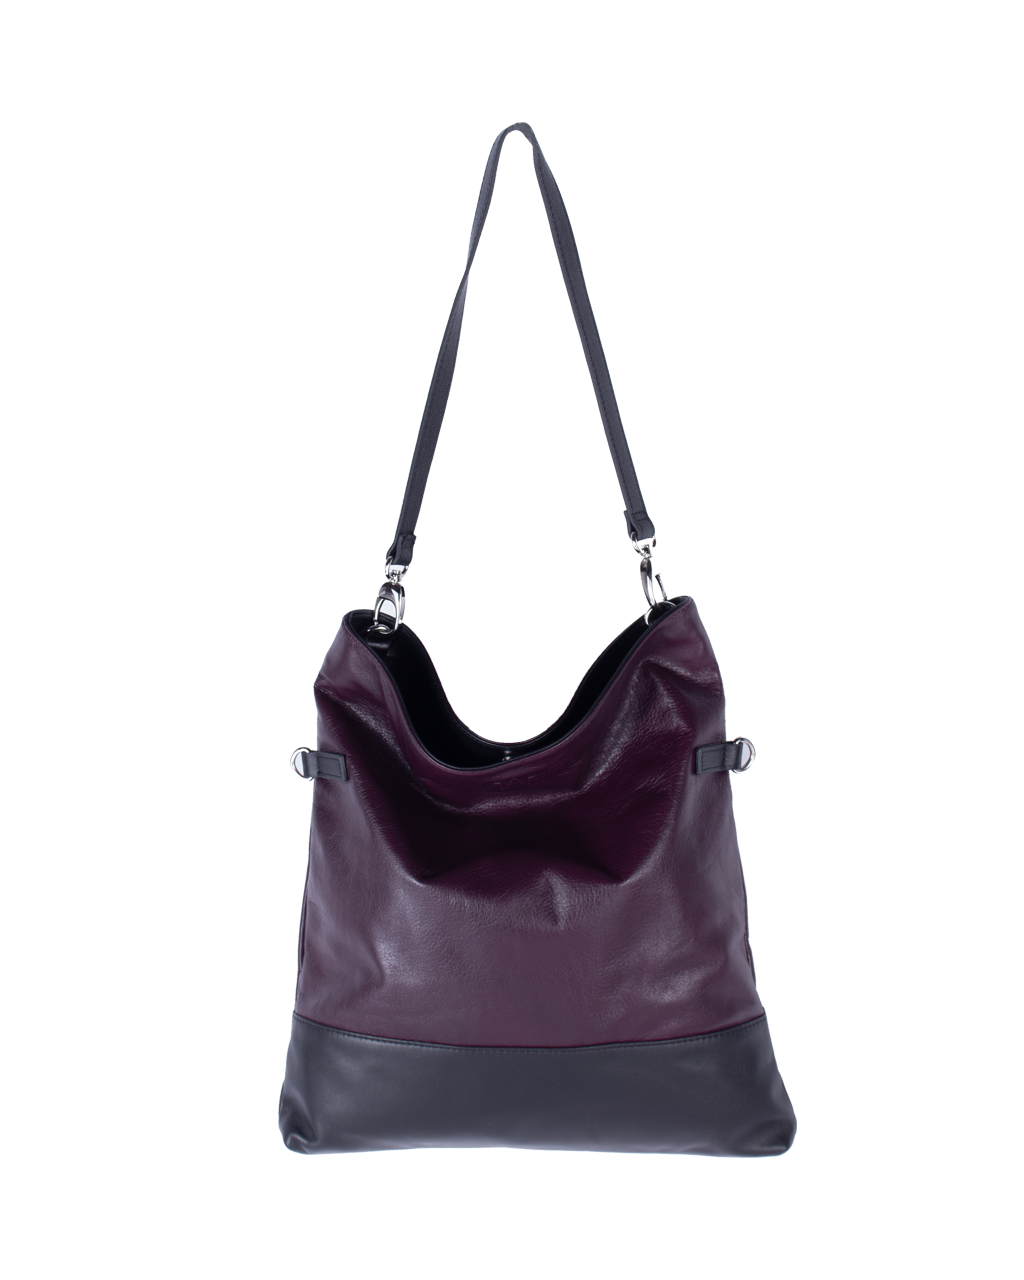 TAT_normcore_14583_twotone leather tote_purple soft look